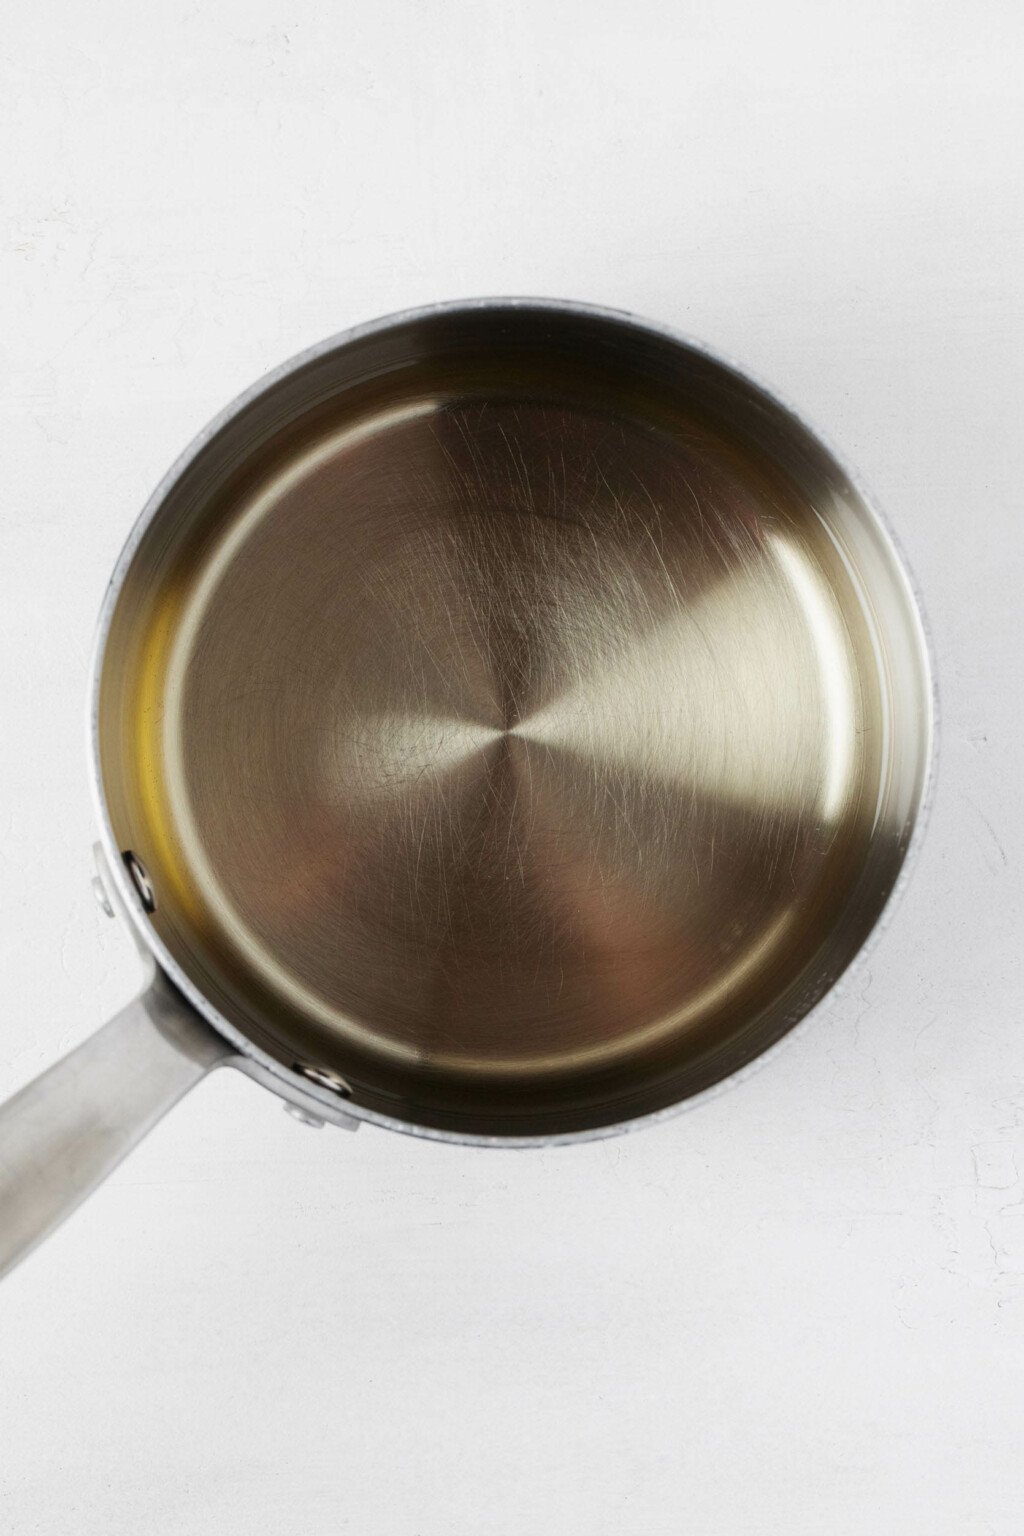 An overhead image of a small, metal saucepan filled with pickling liquid.